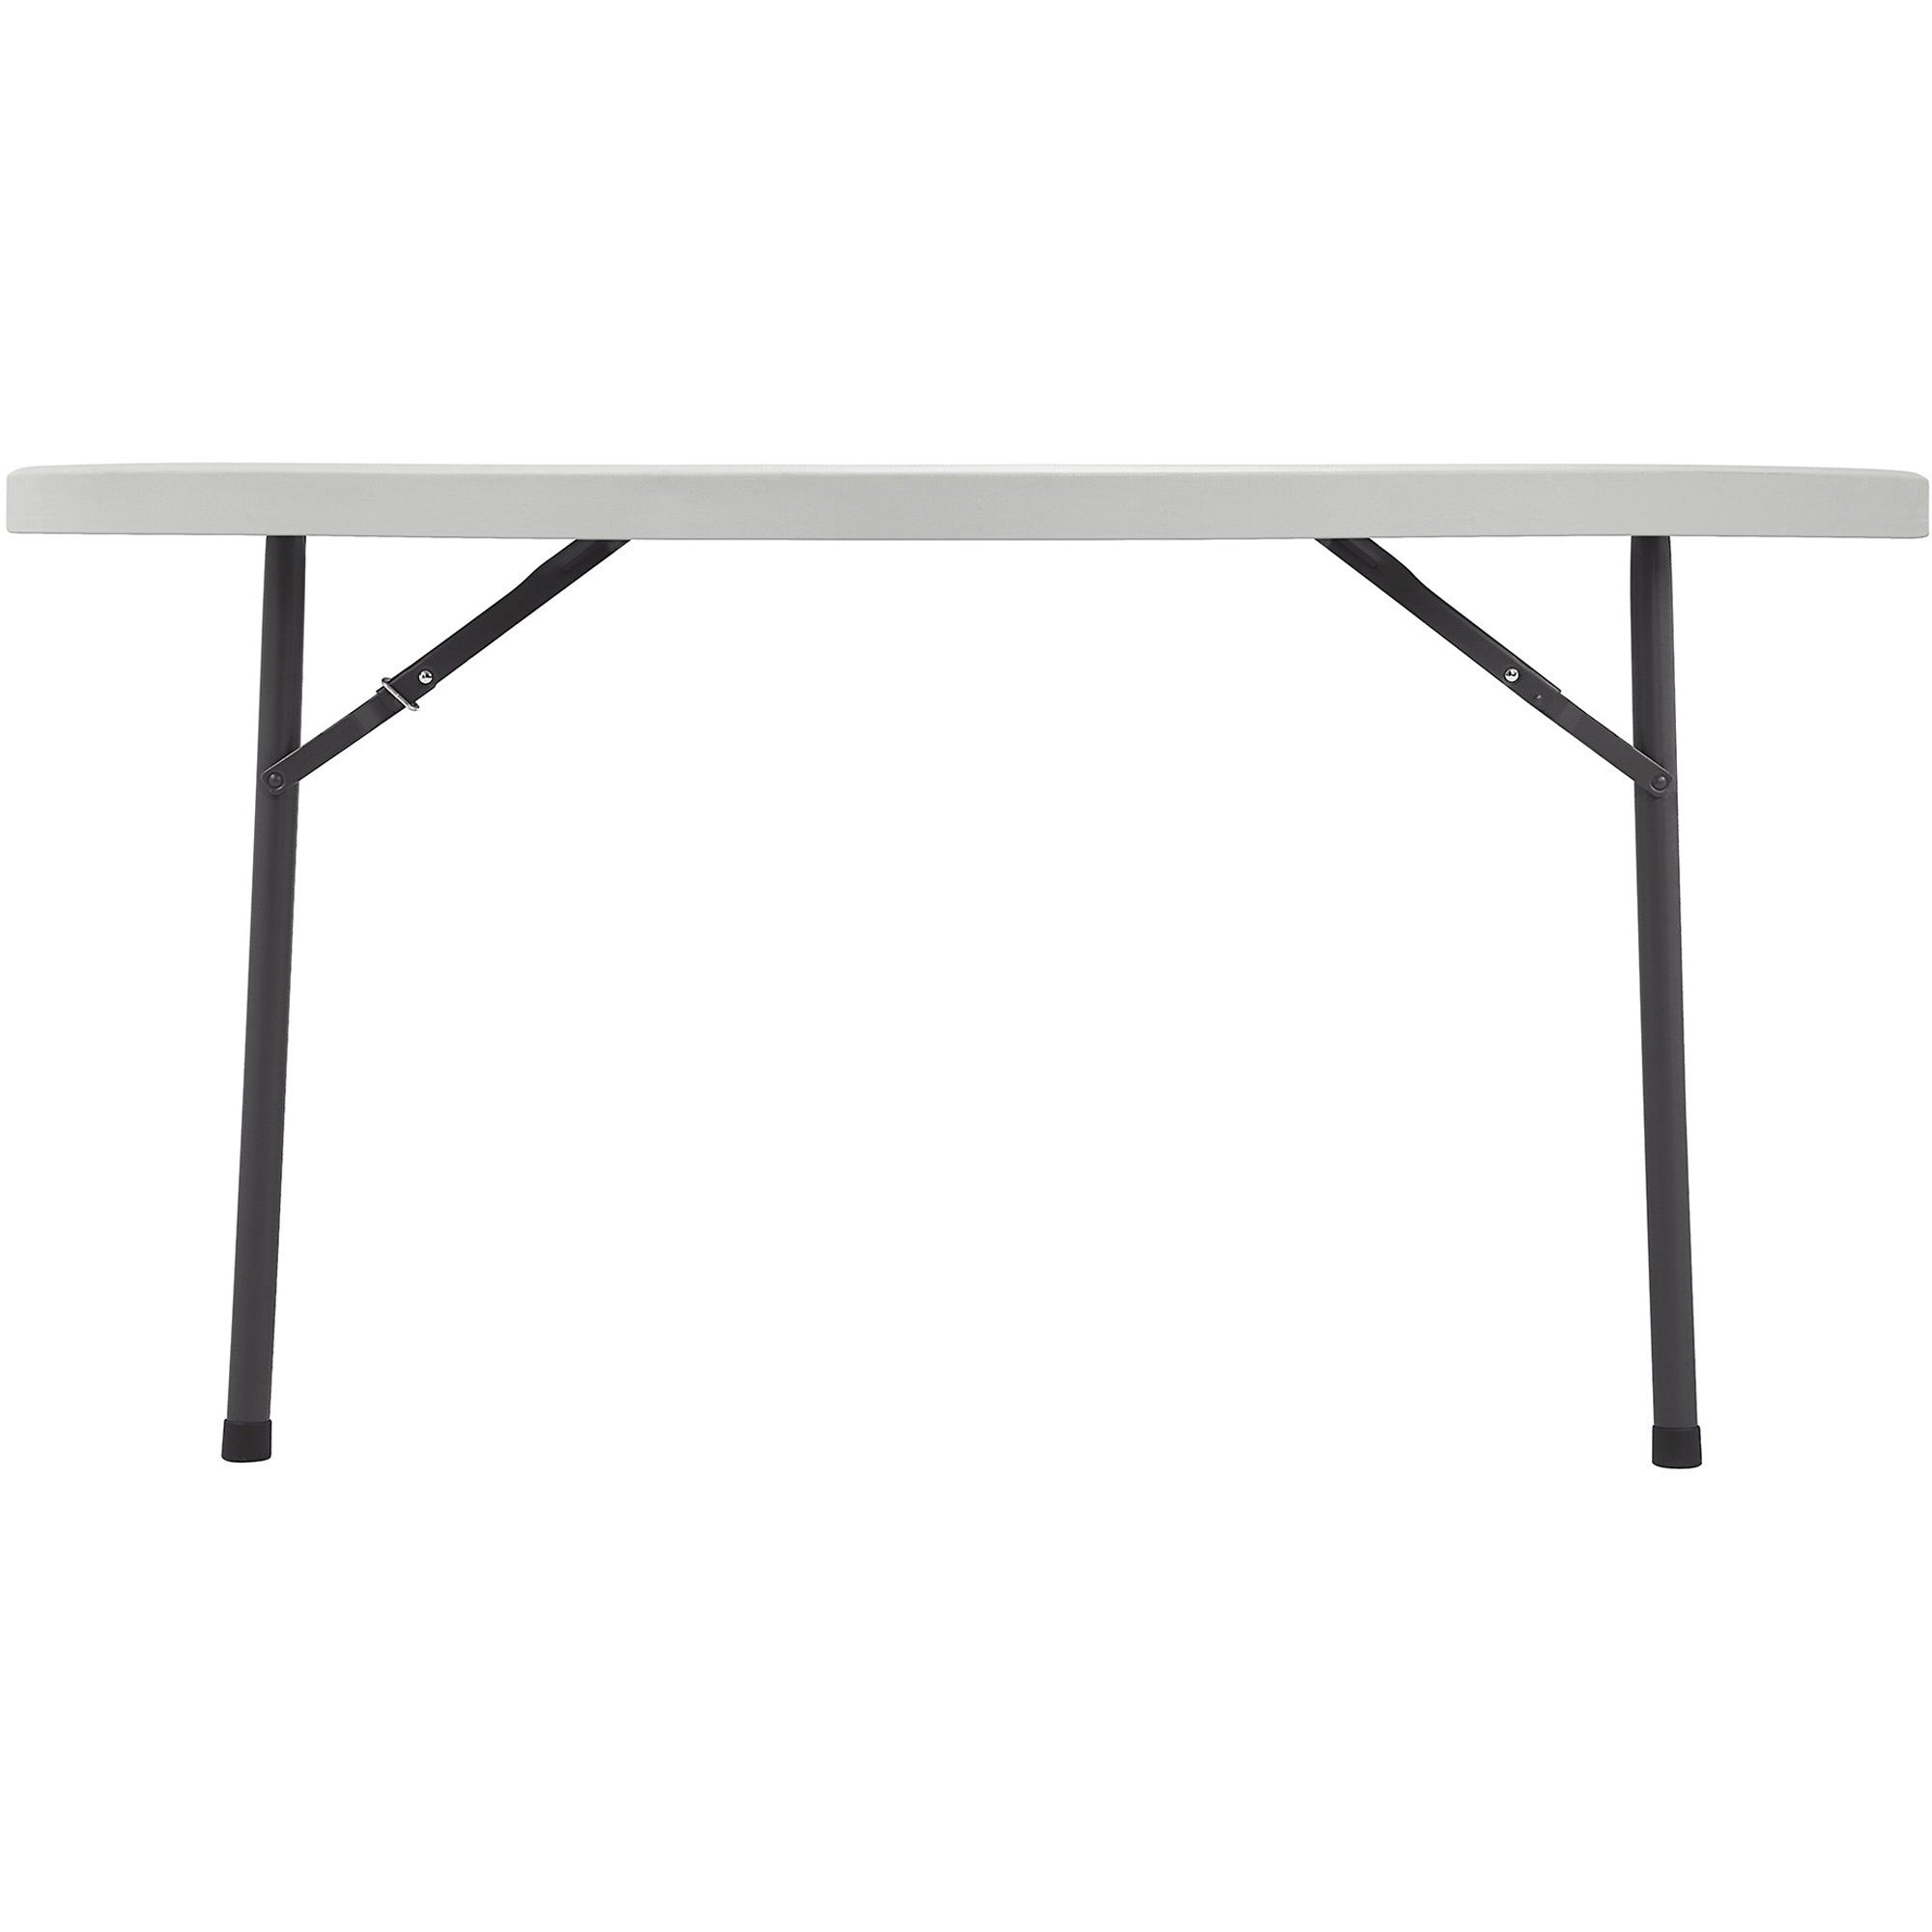 Lorell Ultra-Lite Banquet Folding Table - For - Table TopRound Top - 800 lb Capacity x 71" Table Top Diameter - 29.25" Height x 71" Width x 71" Depth - Gray, Powder Coated - 1 Each - 